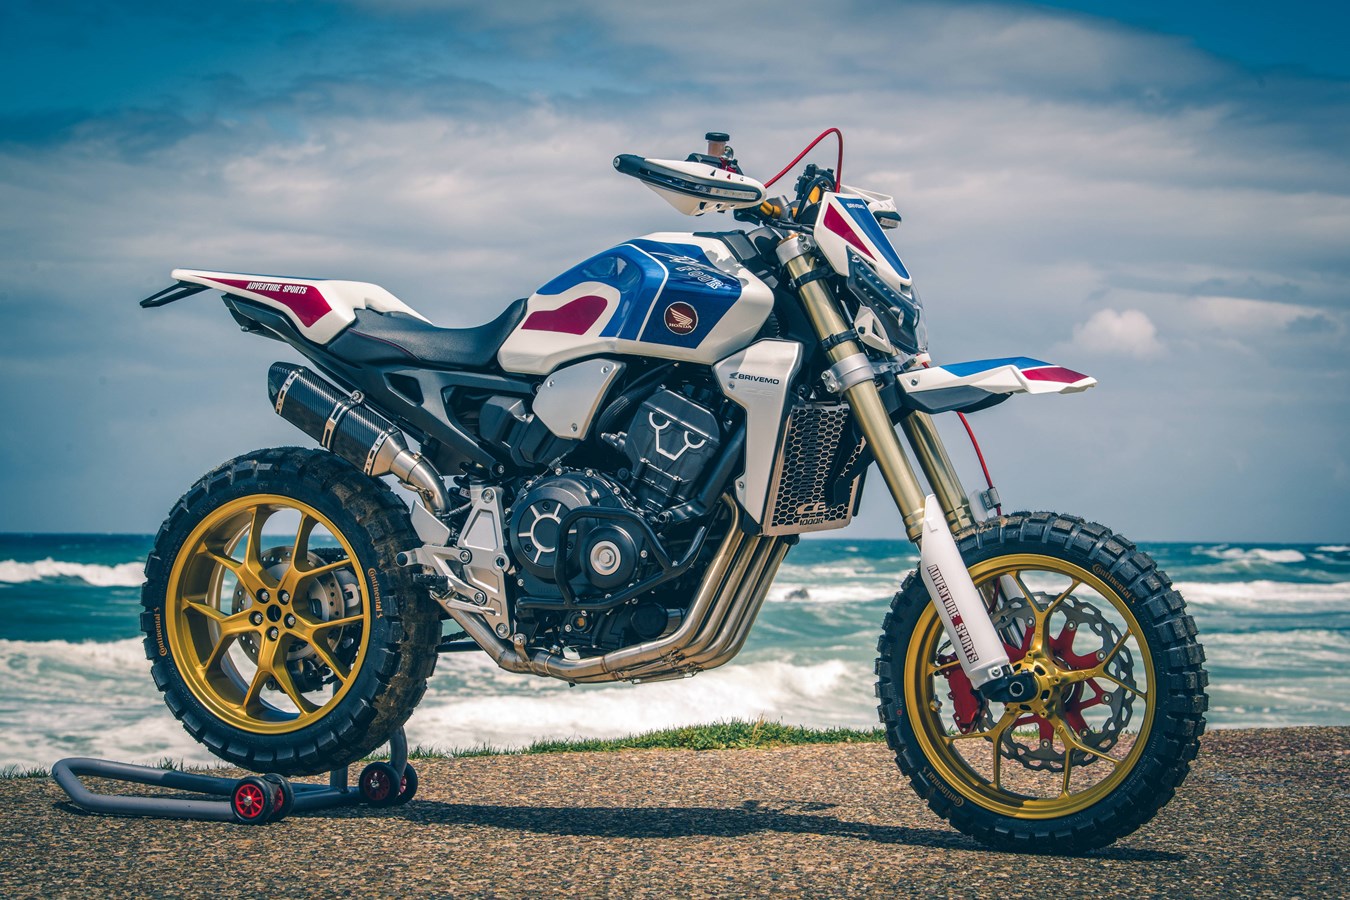 The ‘Africa Four CRF1000R’ - By: Brivemo Motors dealer, Switzerland